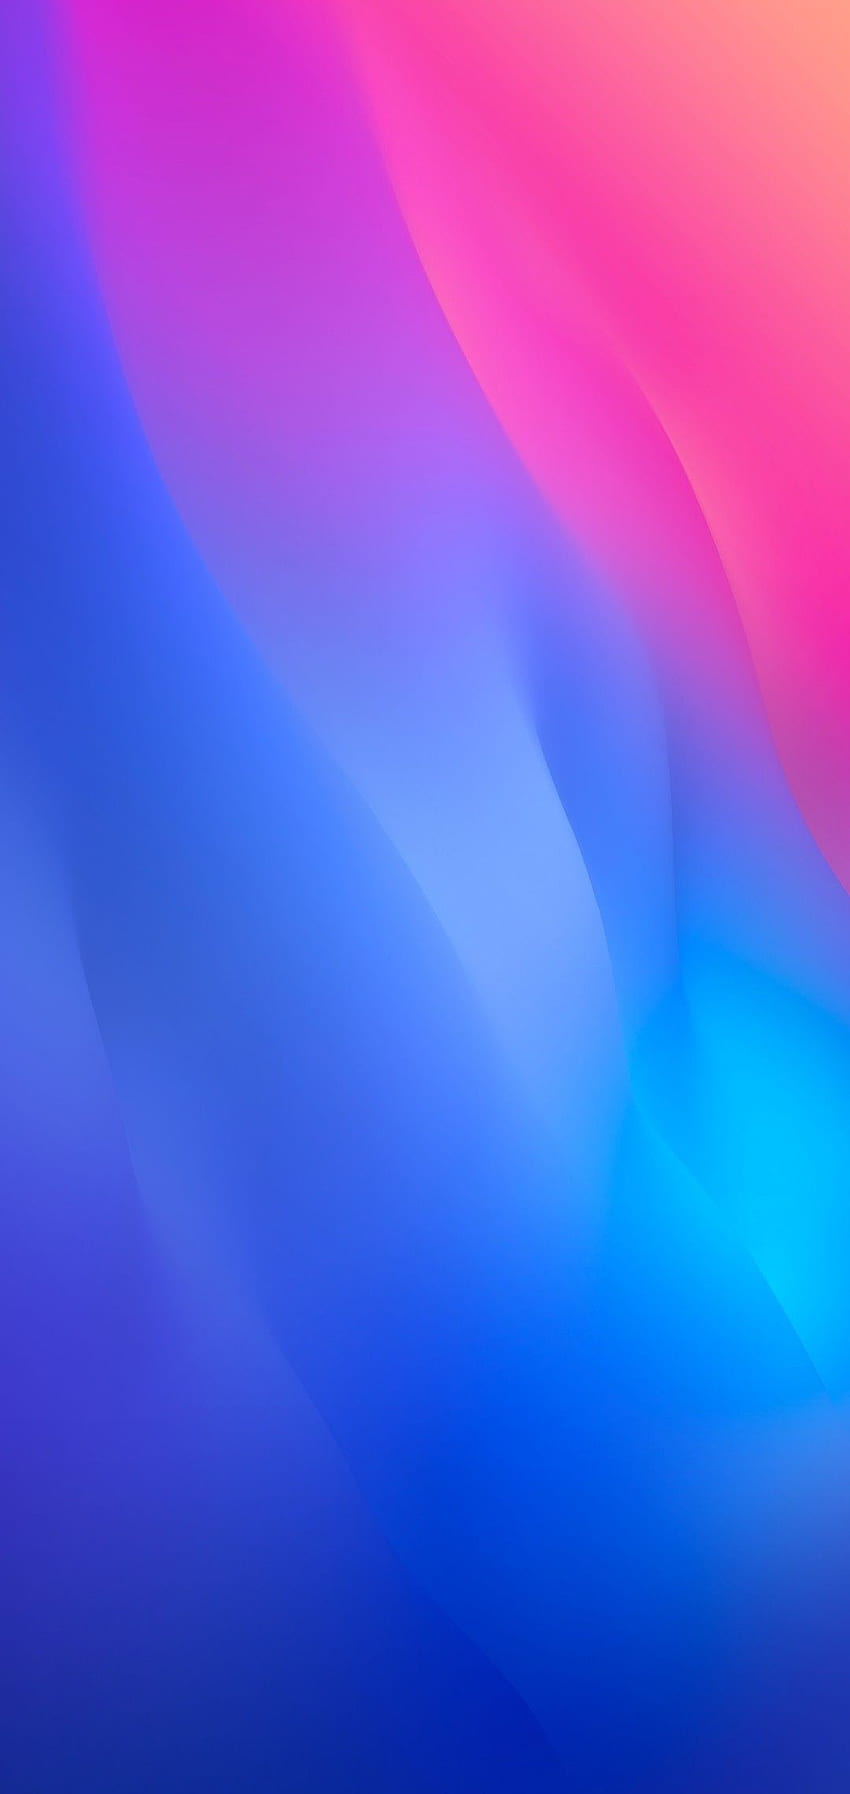 IOS 12, iPhone X, blue, pink, clean, simple, abstract, apple, , iphone 8,  clean, beauty, colour, iOS,. Pink iphone, iPhone , Abstract HD phone  wallpaper | Pxfuel